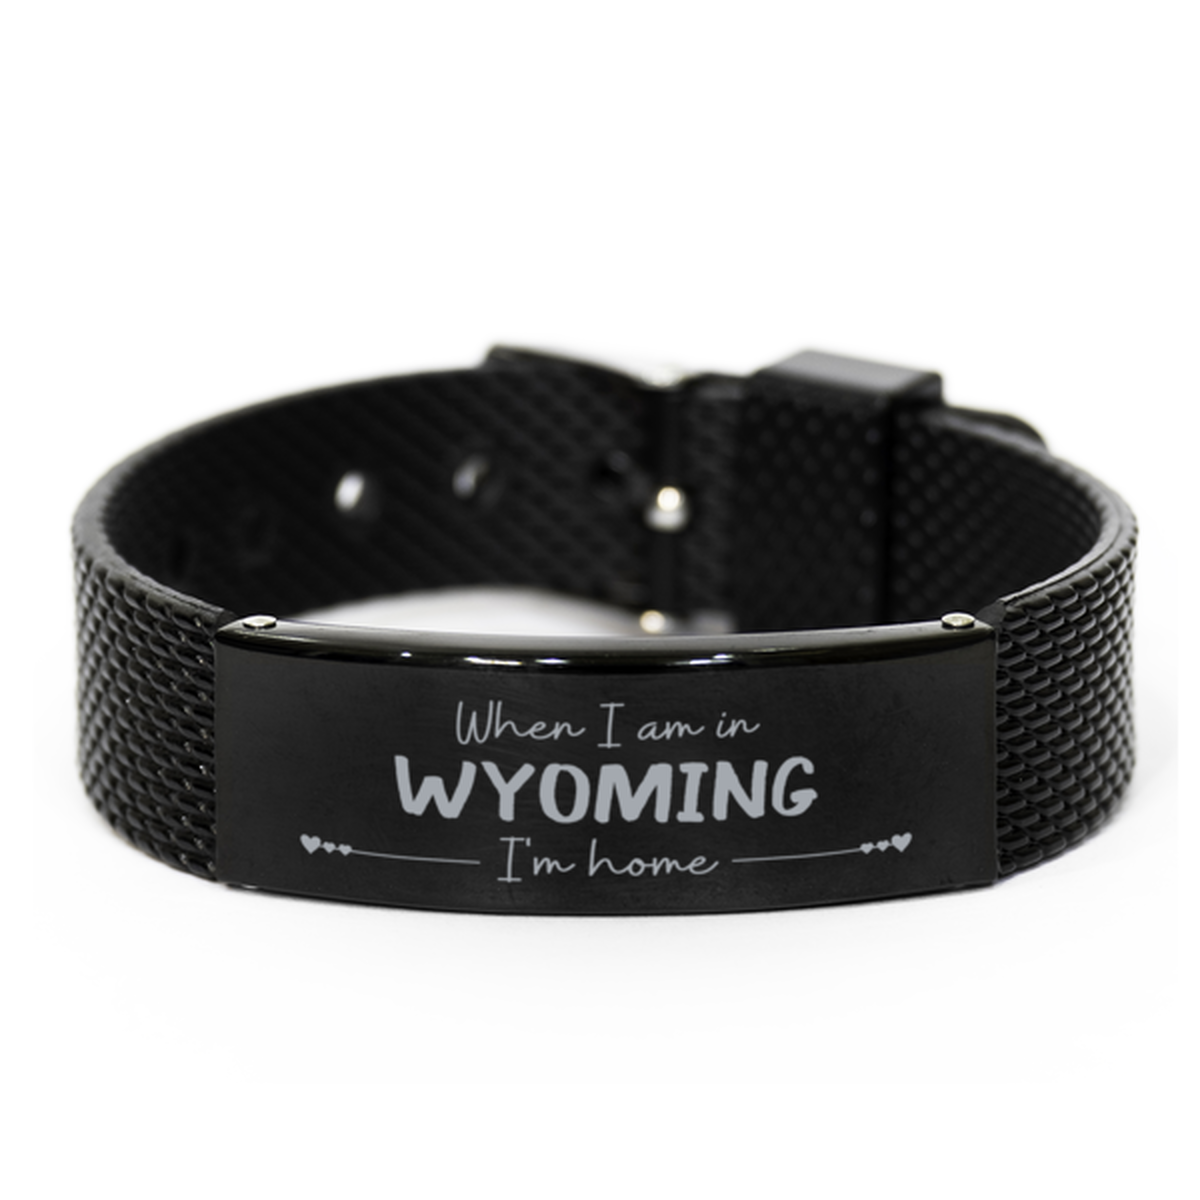 When I am in Wyoming I'm home Black Shark Mesh Bracelet, Cheap Gifts For Wyoming, State Wyoming Birthday Gifts for Friends Coworker